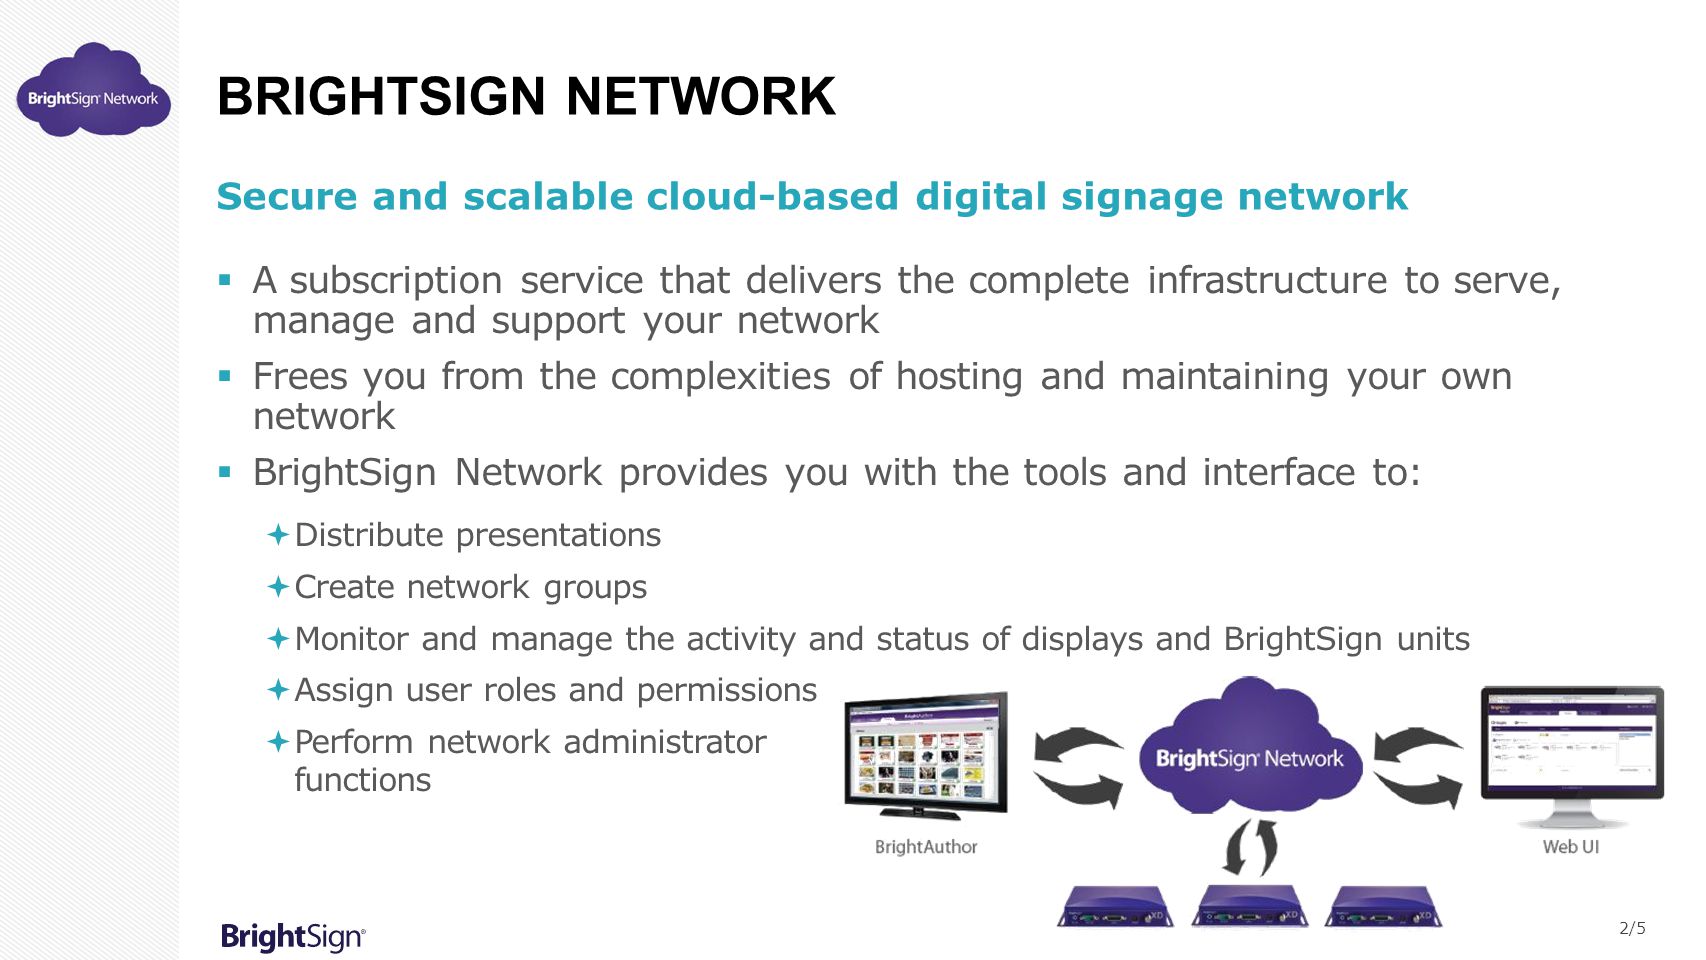 BrightSign Network Secure and scalable cloud-based digital signage network.